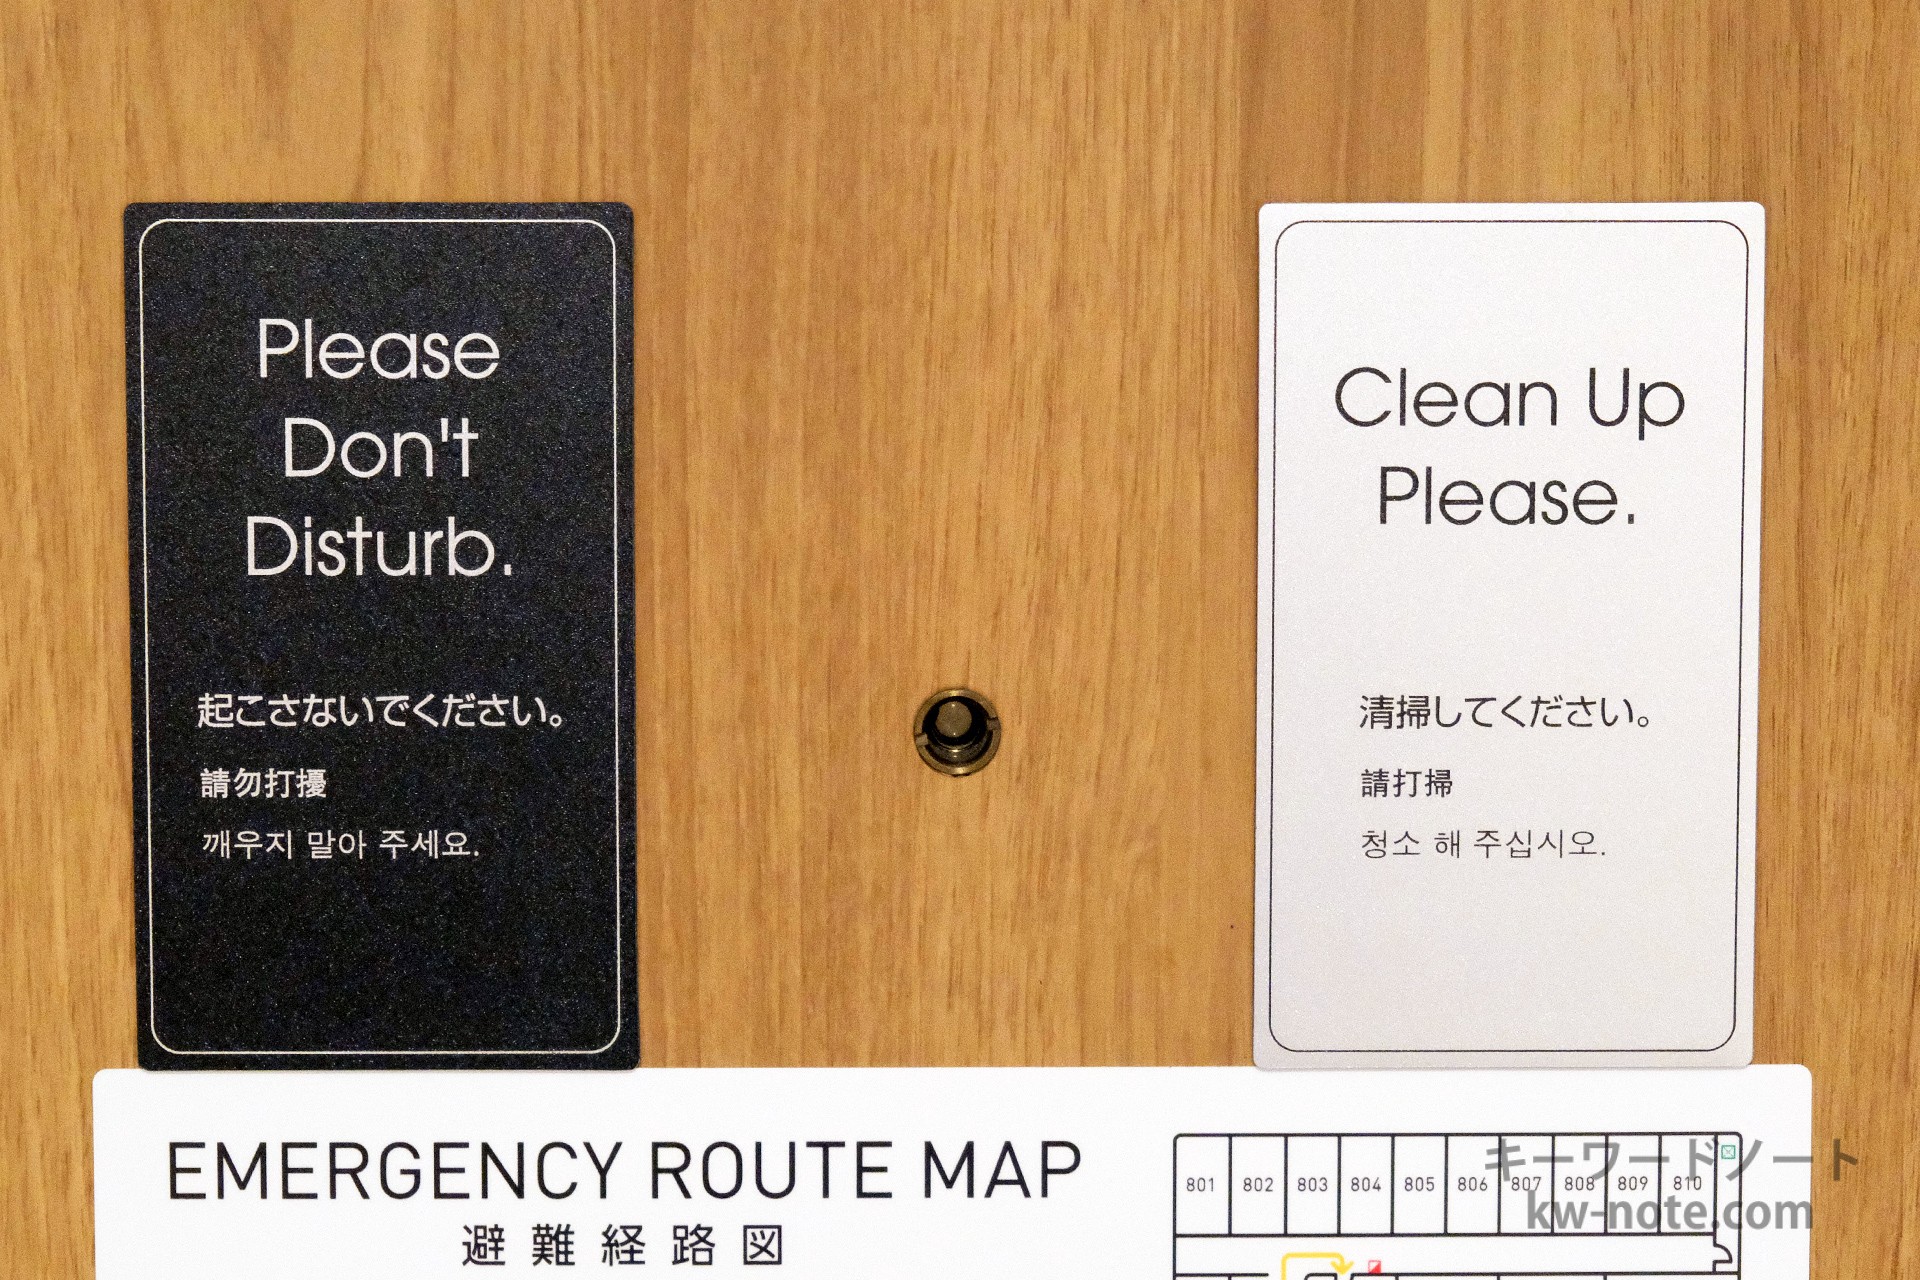 「Please Dont Disturb.」と「Clean Up Please.」